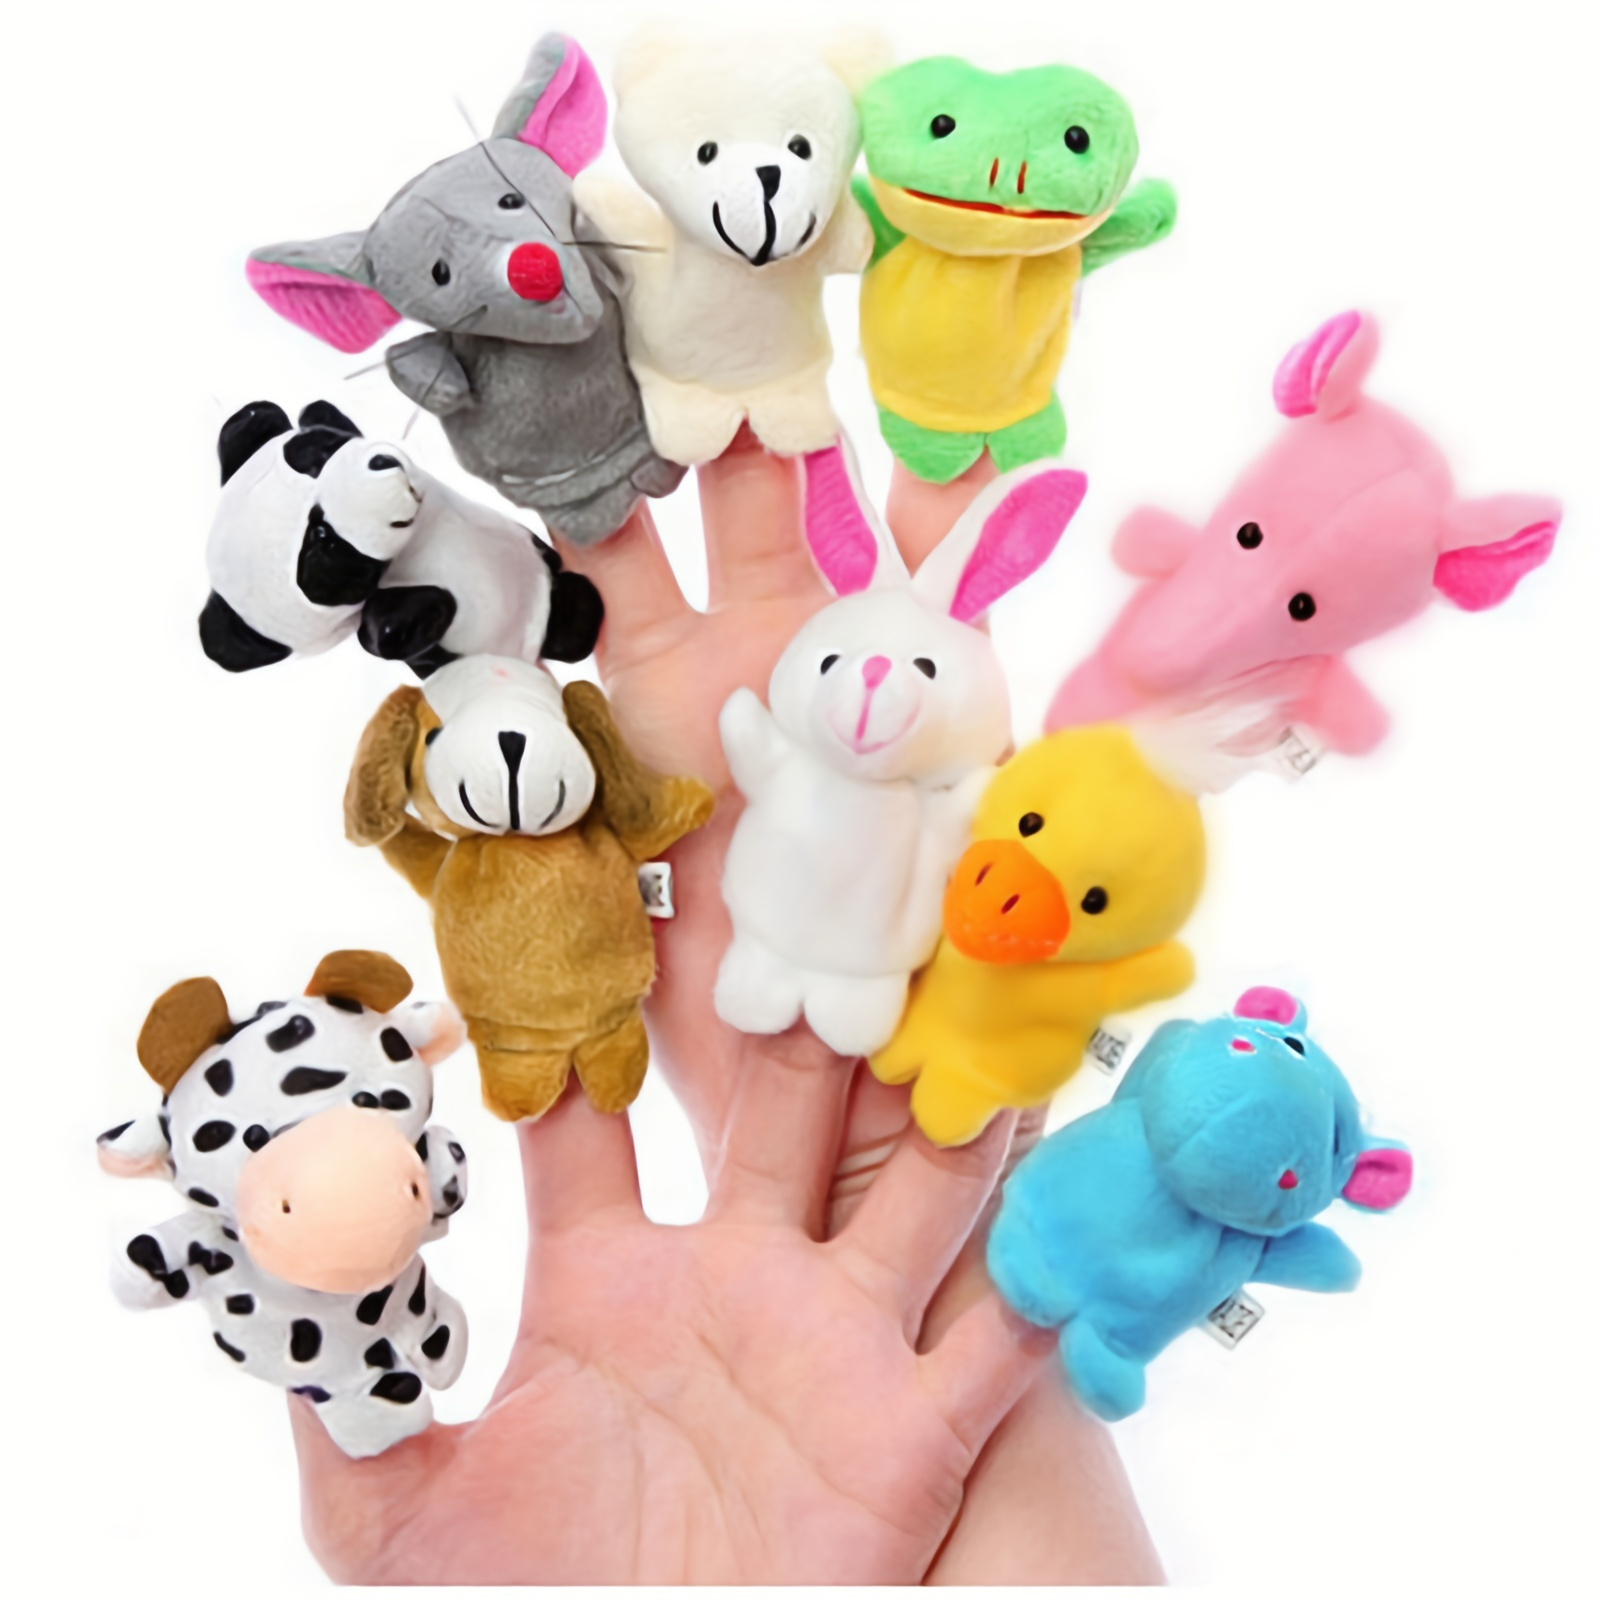 

10pcs Cute Cartoon Animal Finger Puppets - Perfect Plush Toys For Kids Of All Ages! Christmas Halloween Thanksgiving Gifts Easter Gift